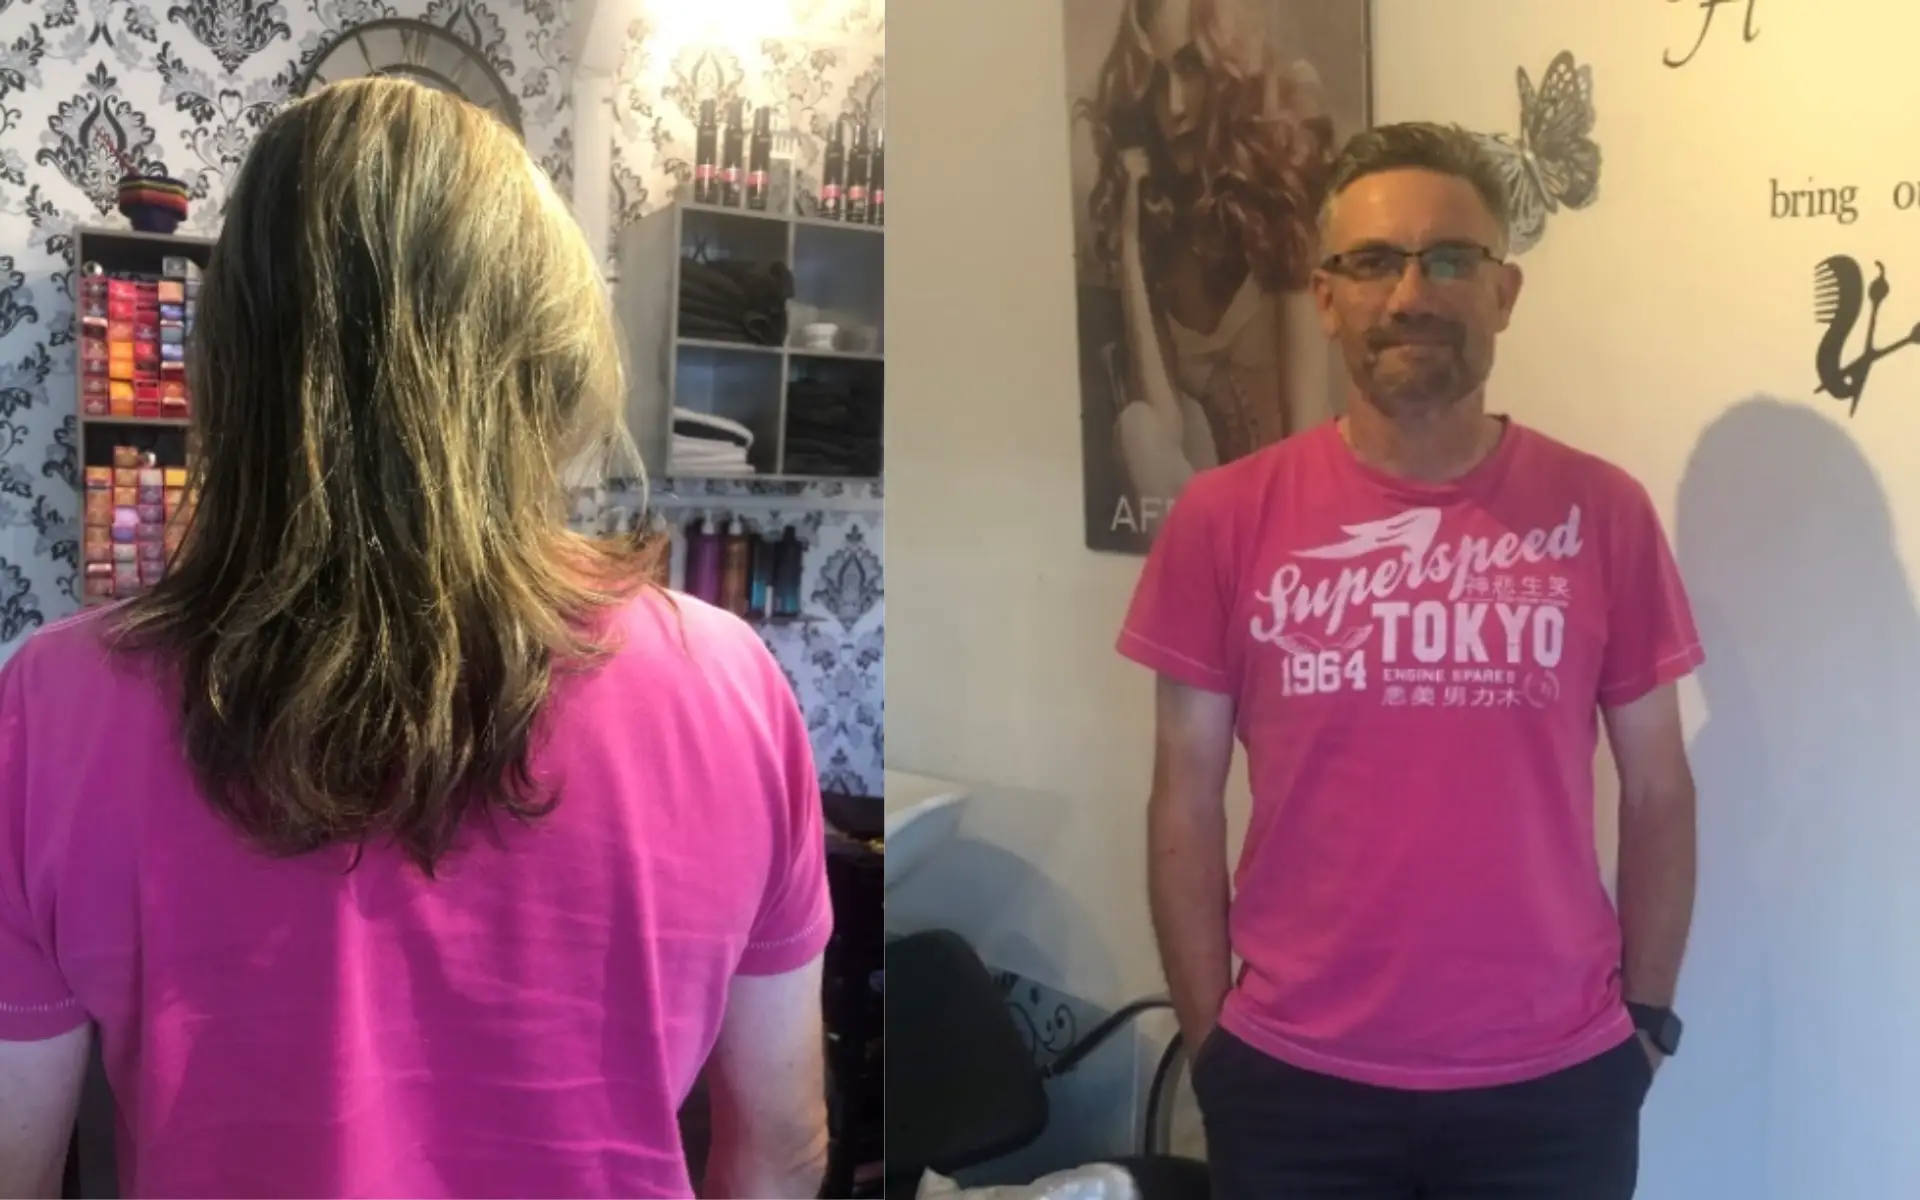 Wayne before and After having his locks chopped